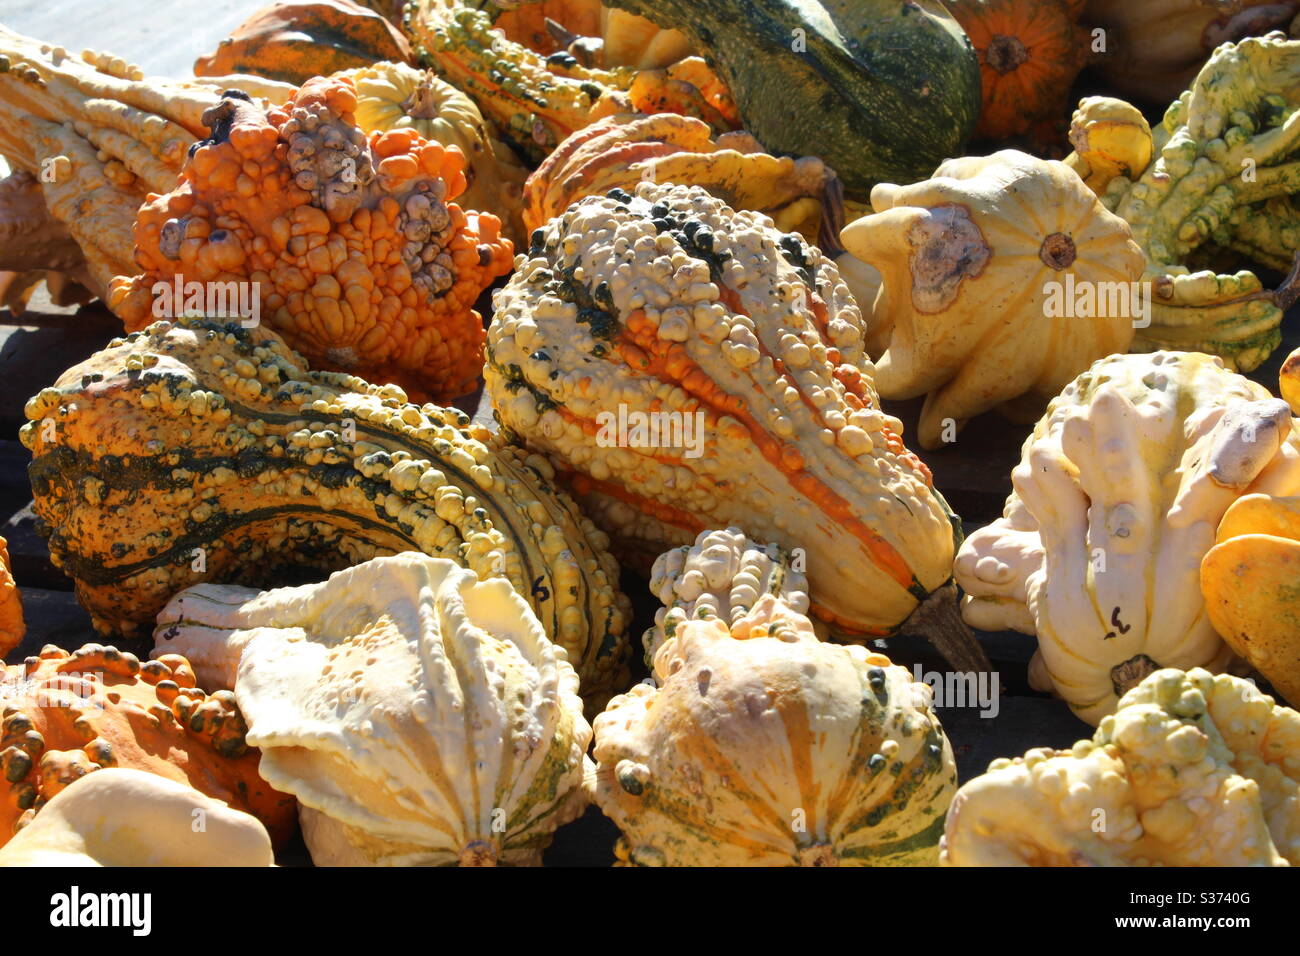 Bumpy gourds and pumpkins for fall festival Stock Photo